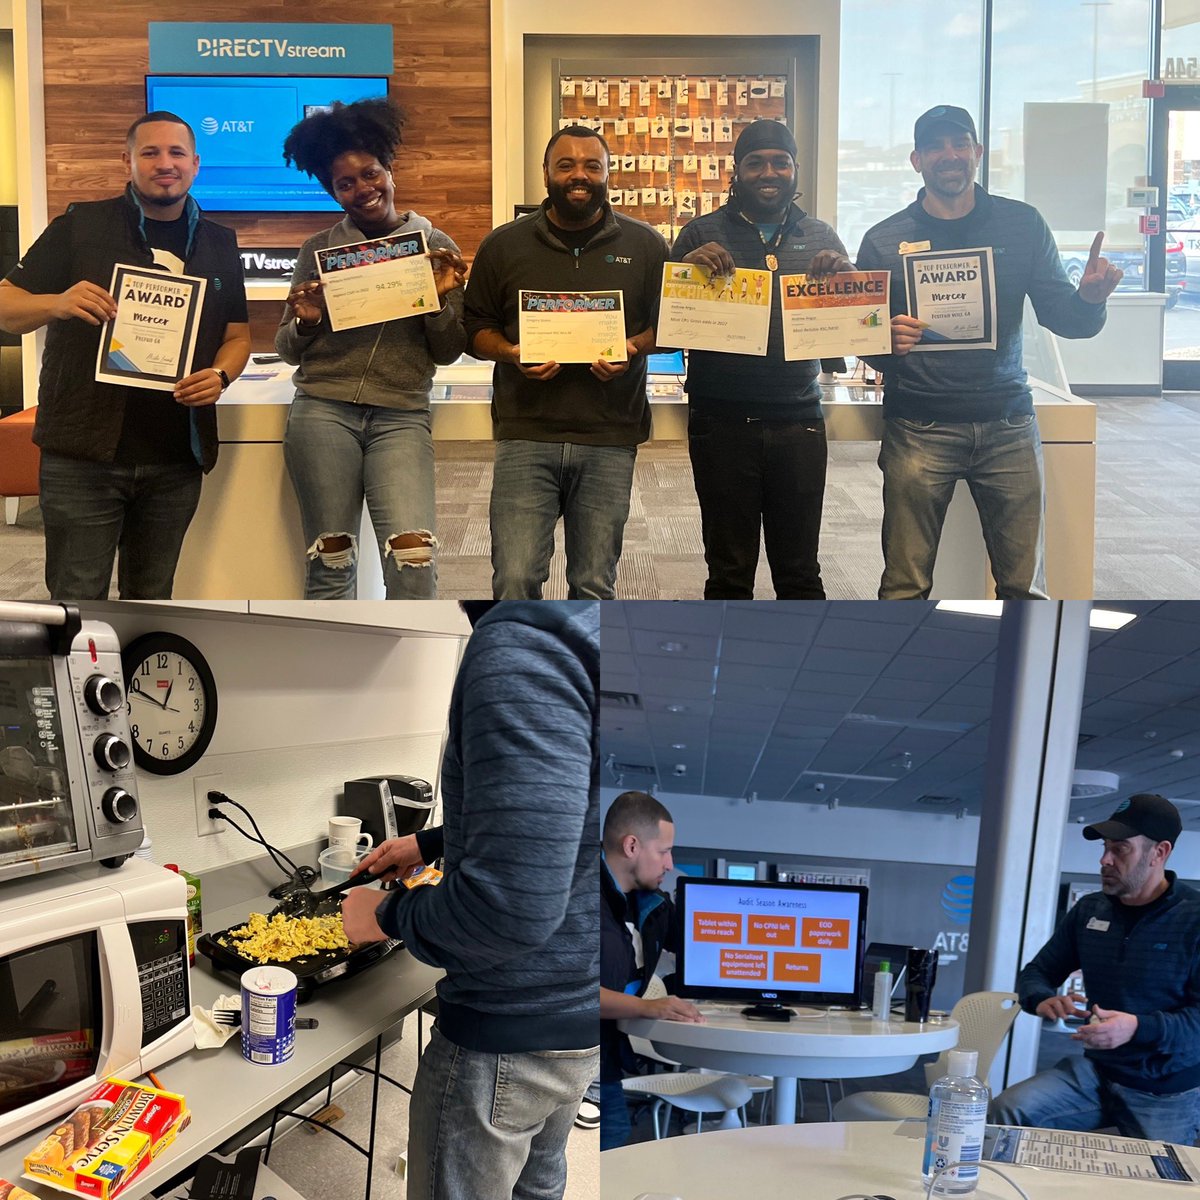 #MMM 23 Meeting. Cheffed some breakfast gave out awards and layed out the game plan! big business! #recognize #wewintogether #OhPA